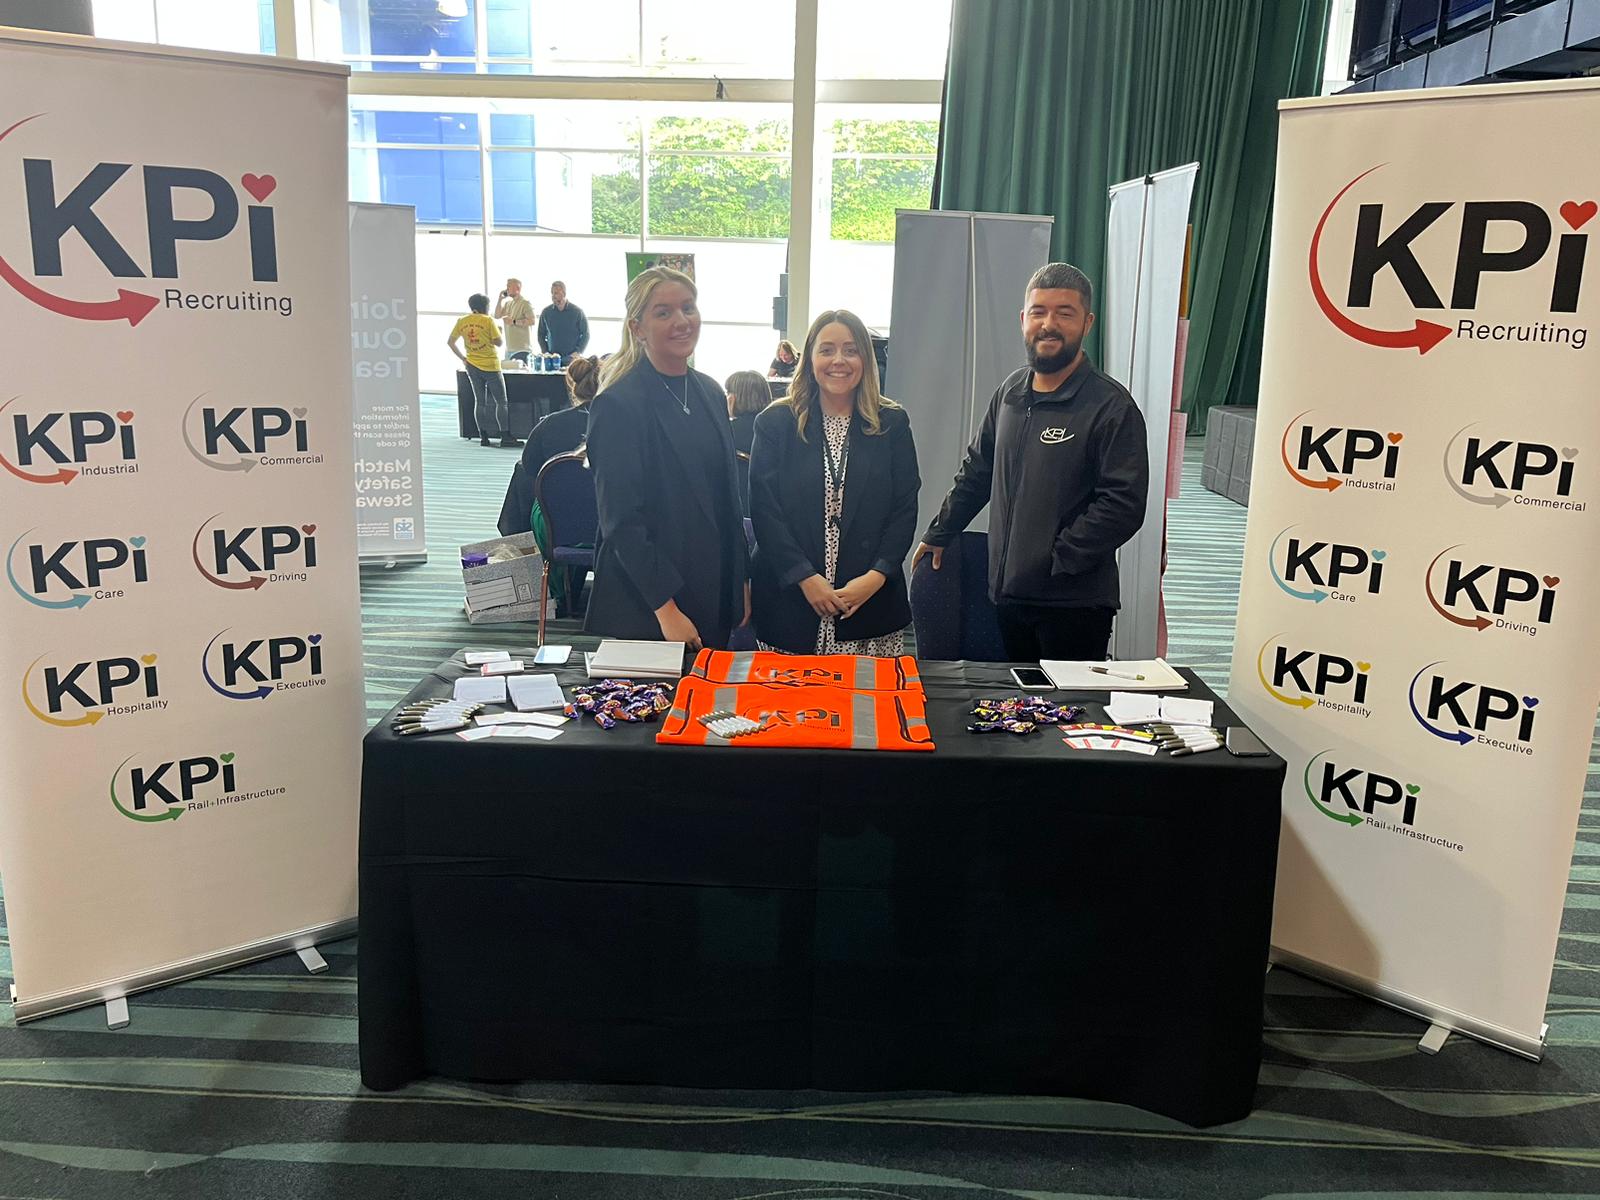 KPI Recruitment at our event in Bolton